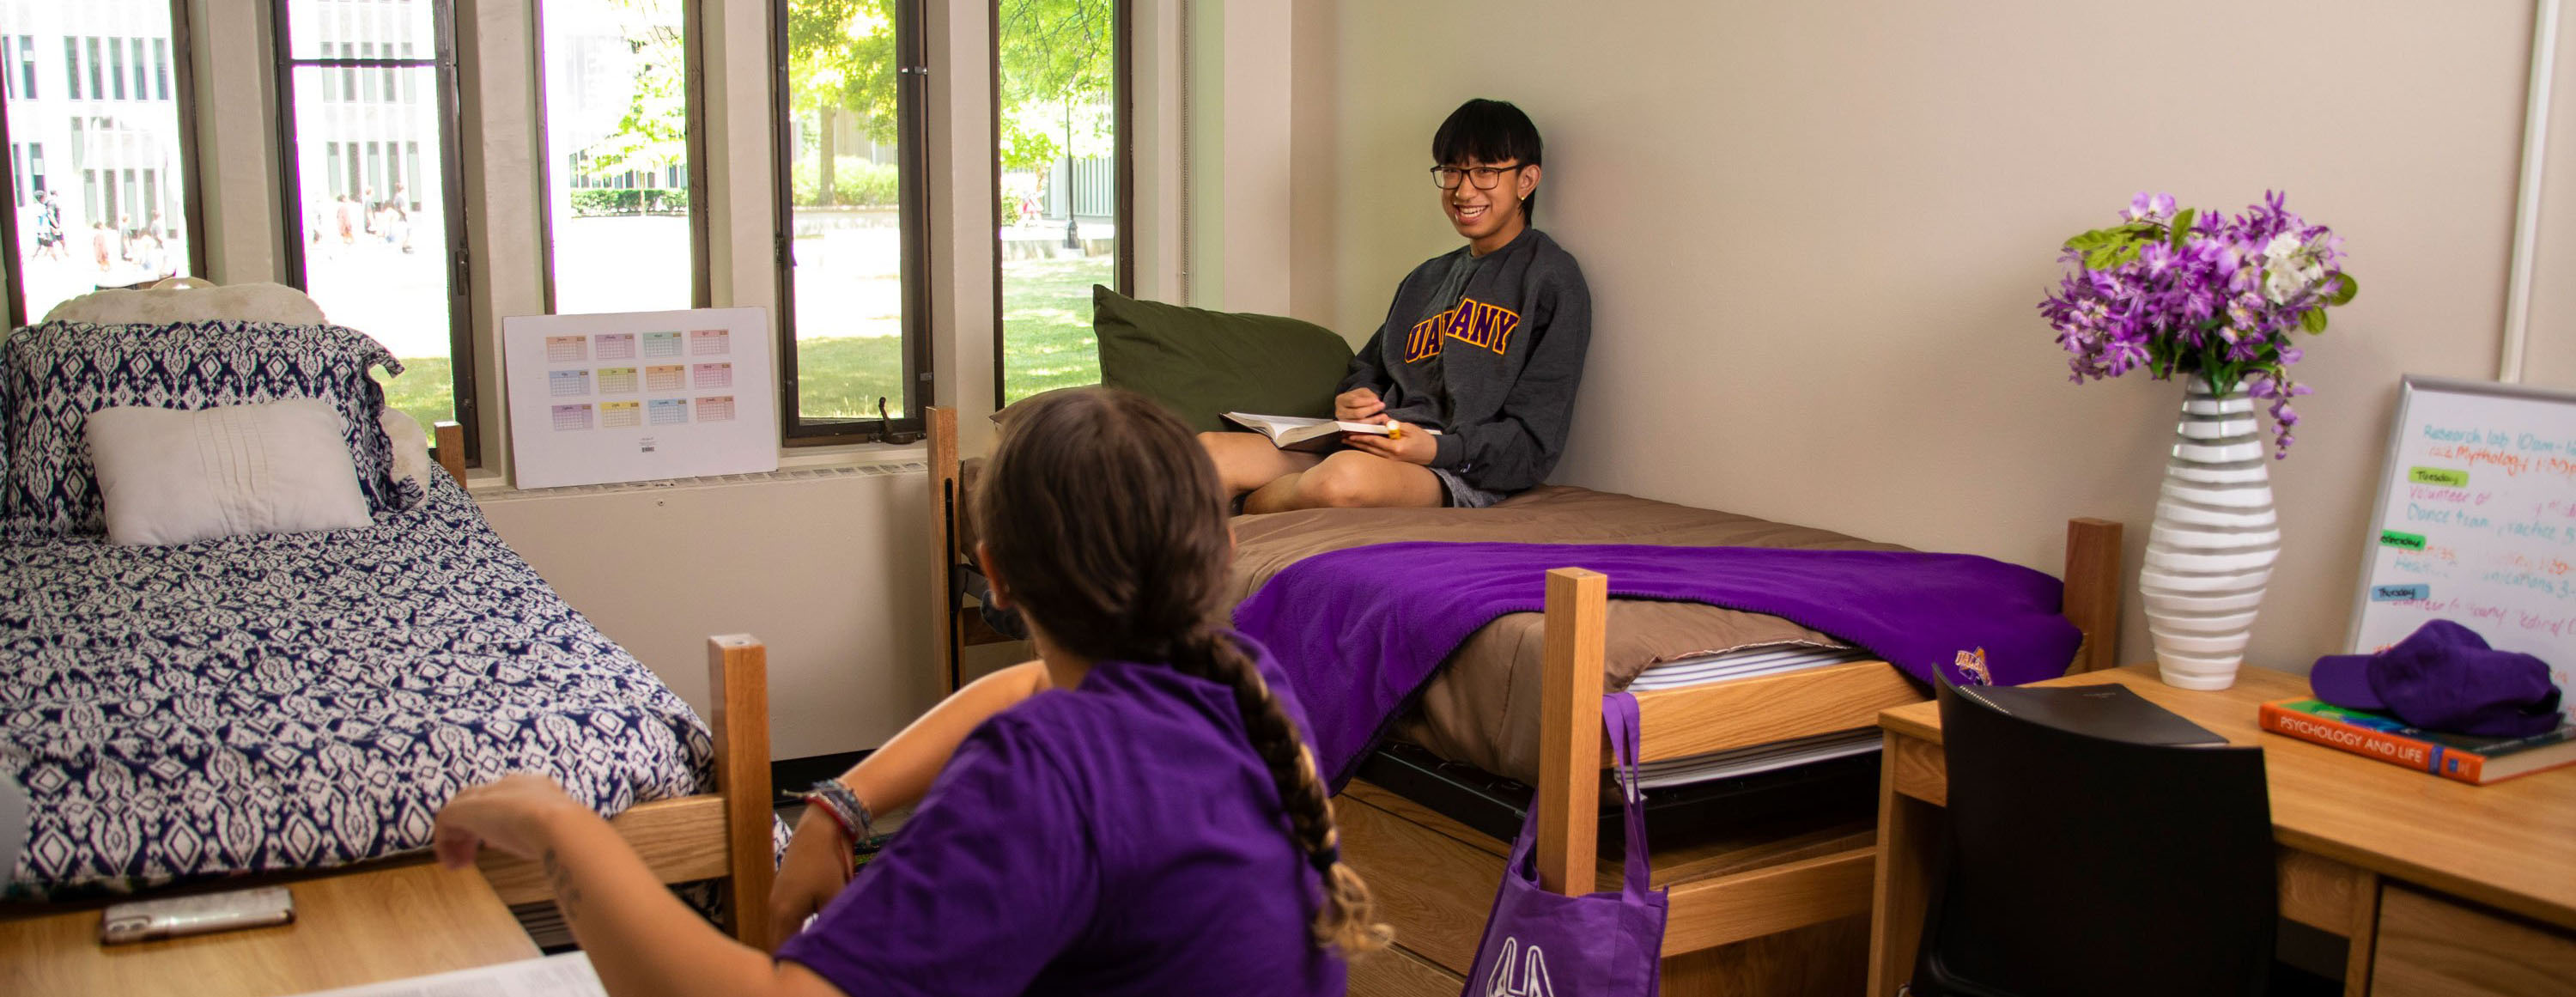 A double on-campus bedroom, with two twin beds, two desks and two chairs. One student sits at a desk and another sits on the bed, smiling and laughing together.